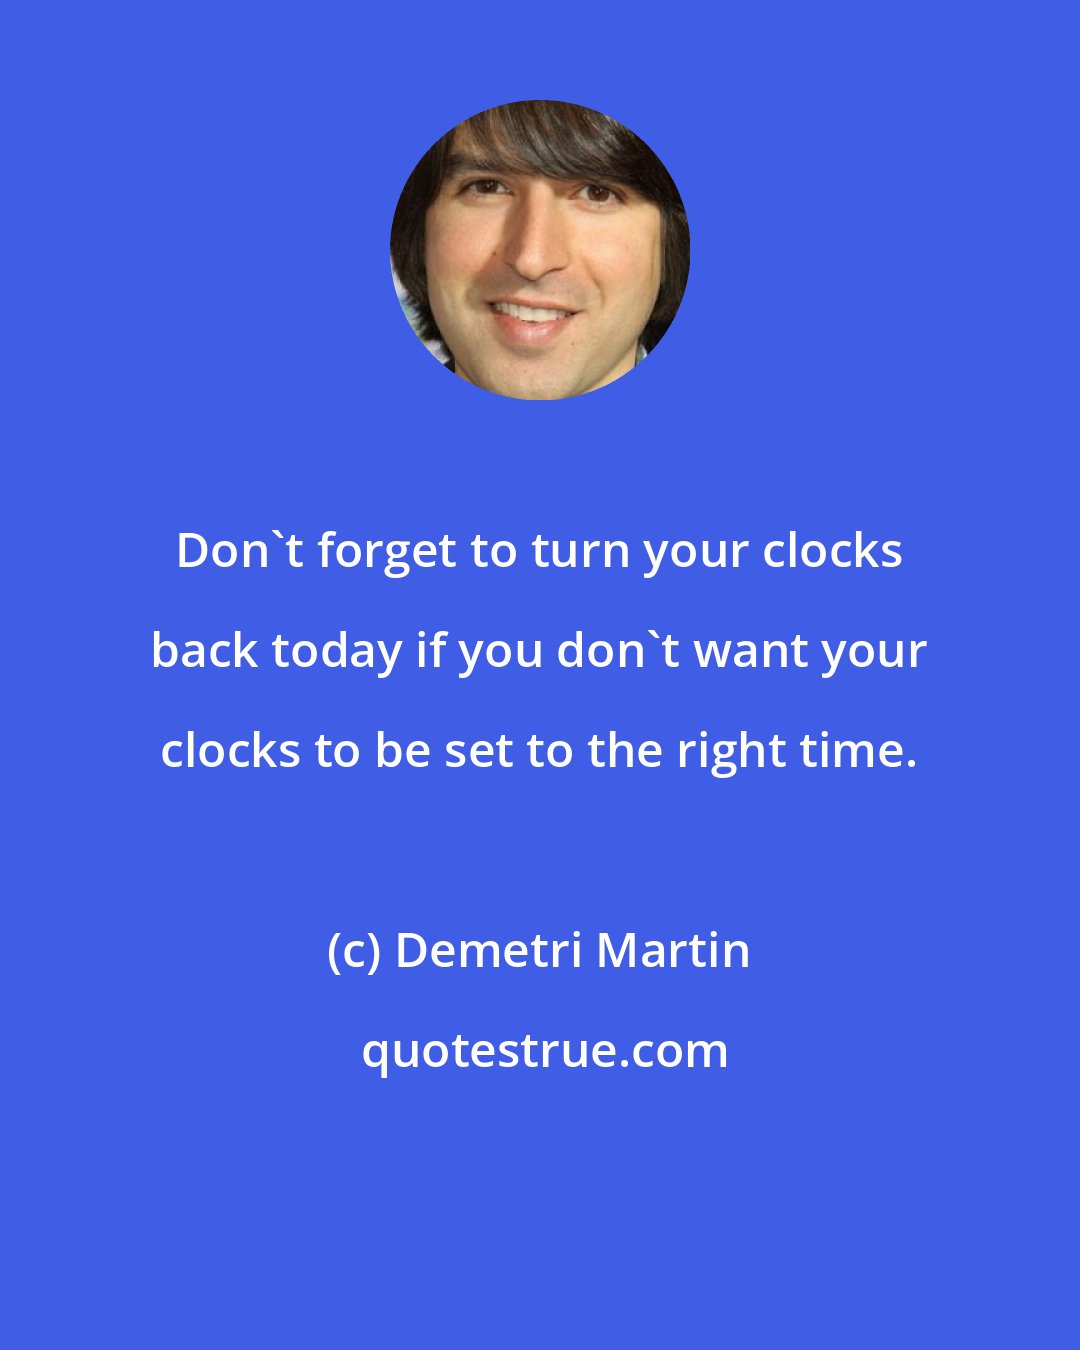 Demetri Martin: Don't forget to turn your clocks back today if you don't want your clocks to be set to the right time.